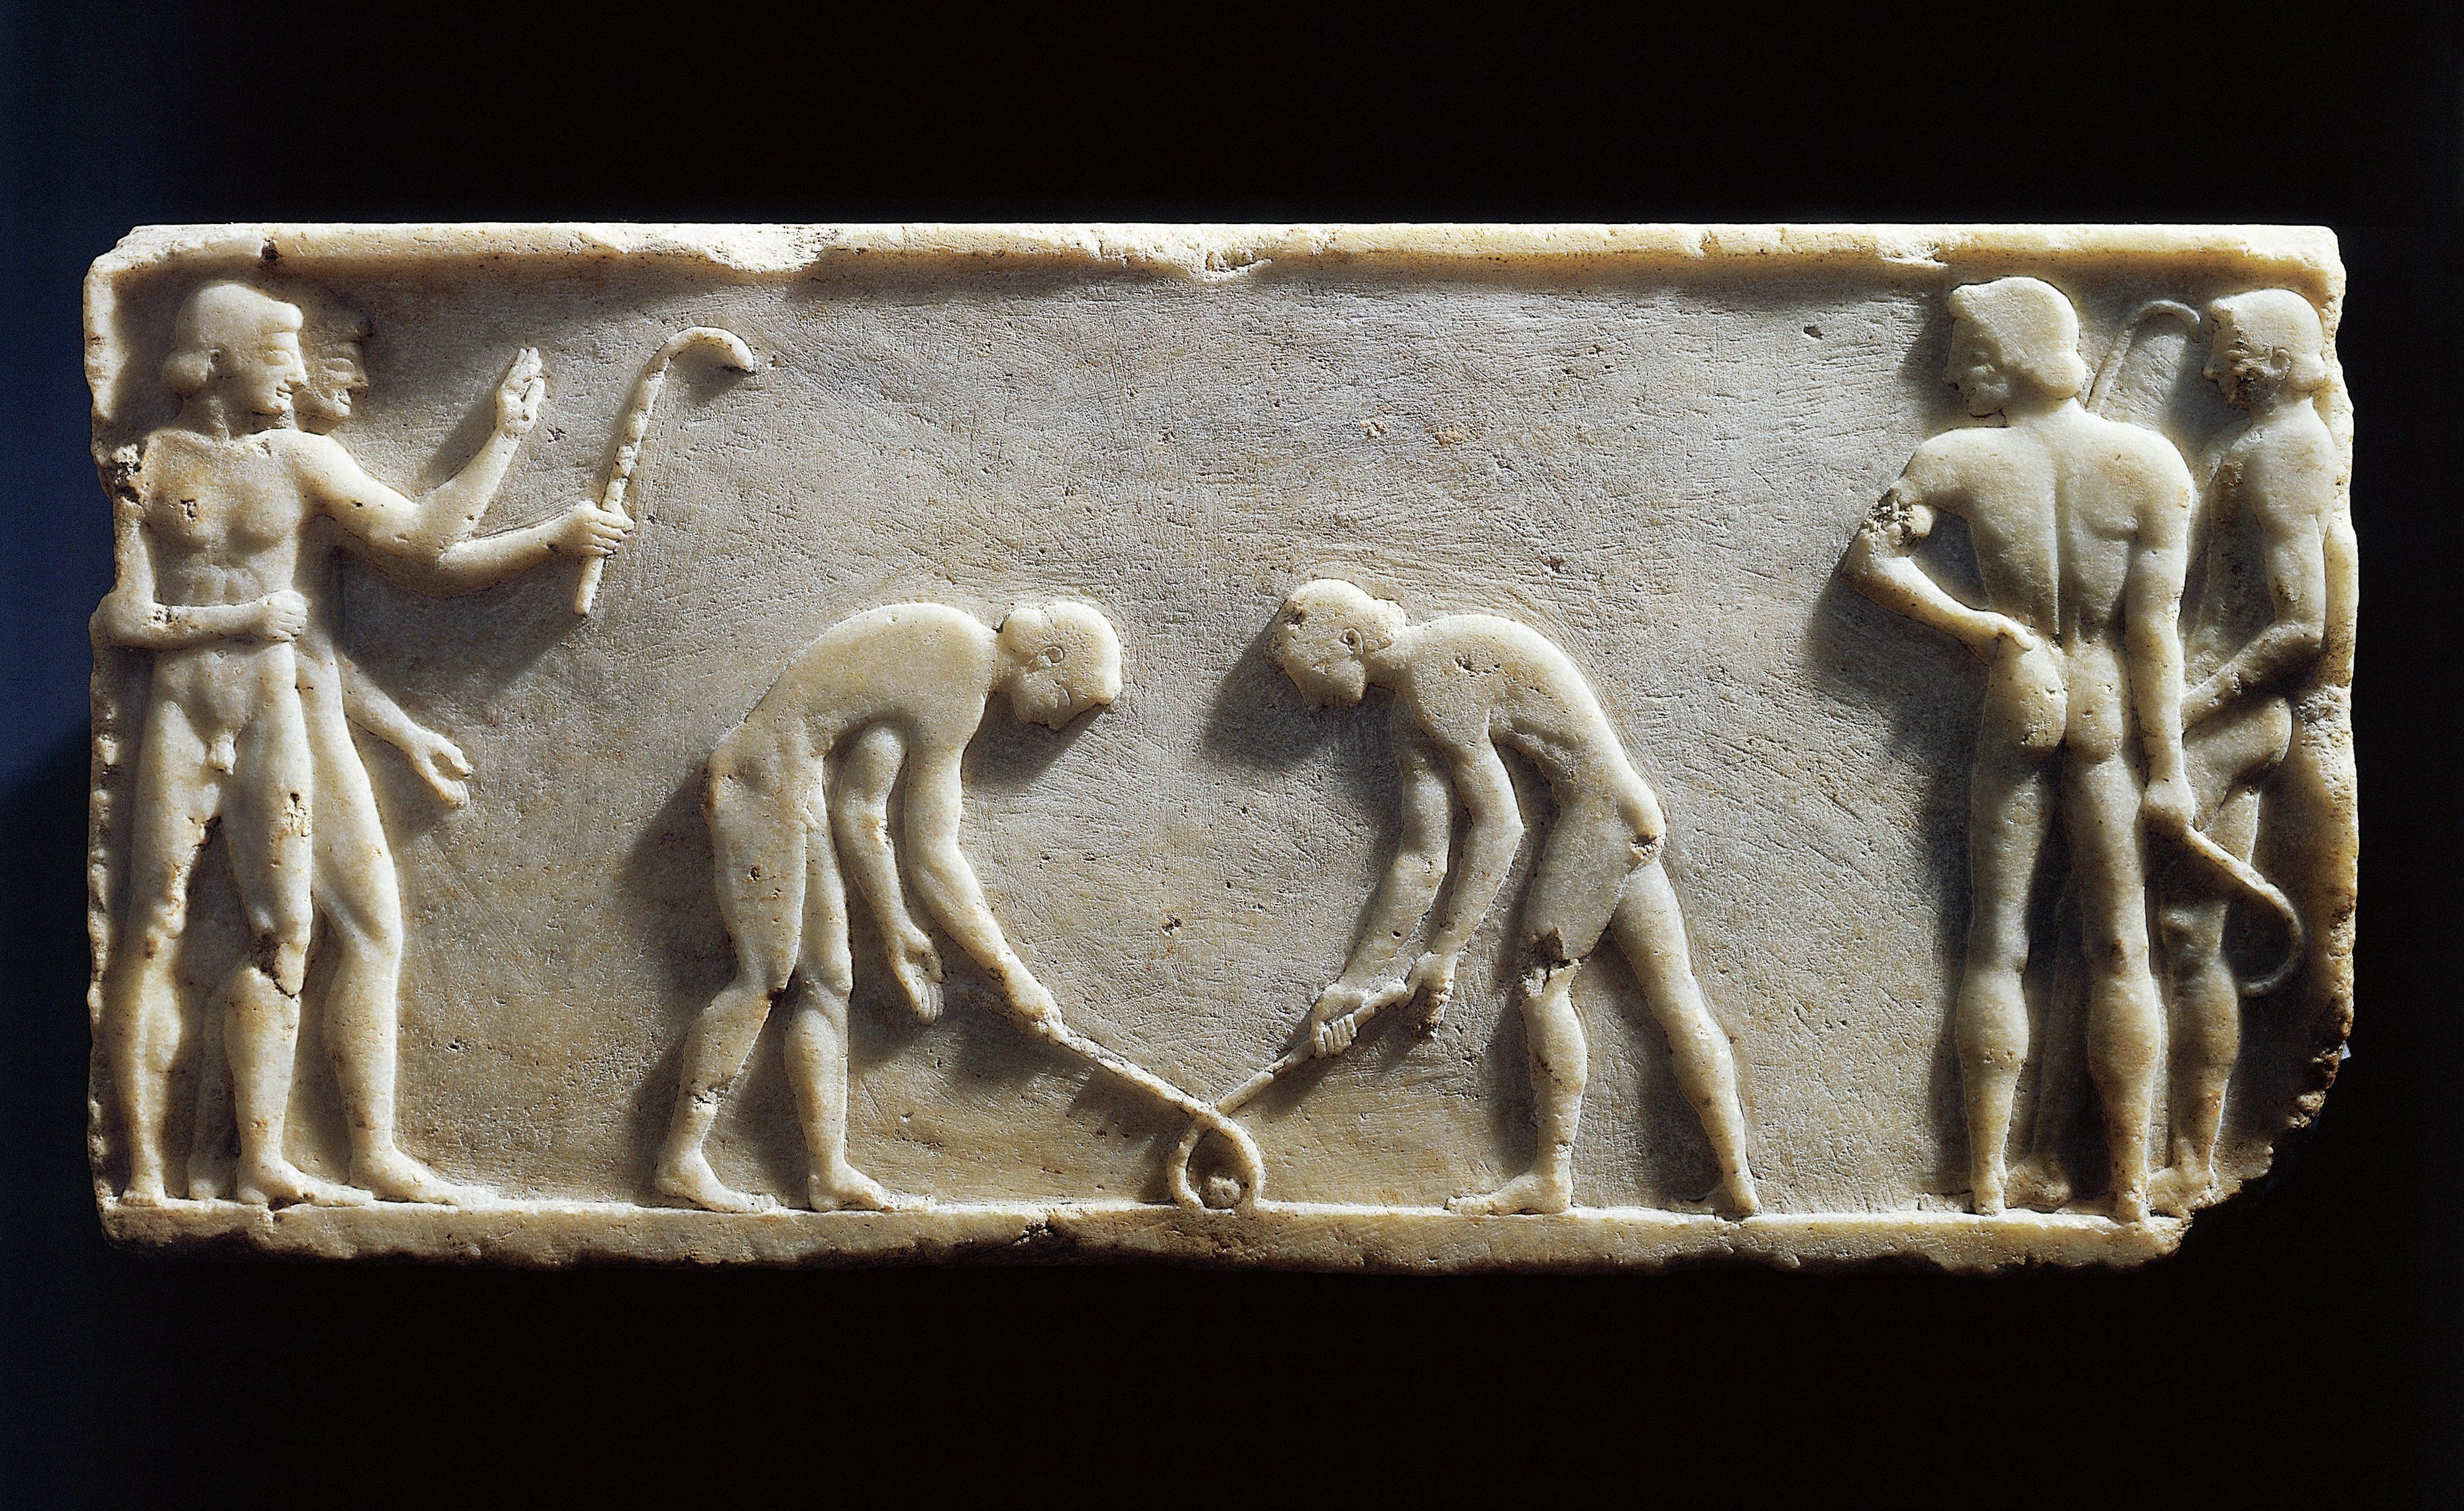 Hockey in ancient Greece